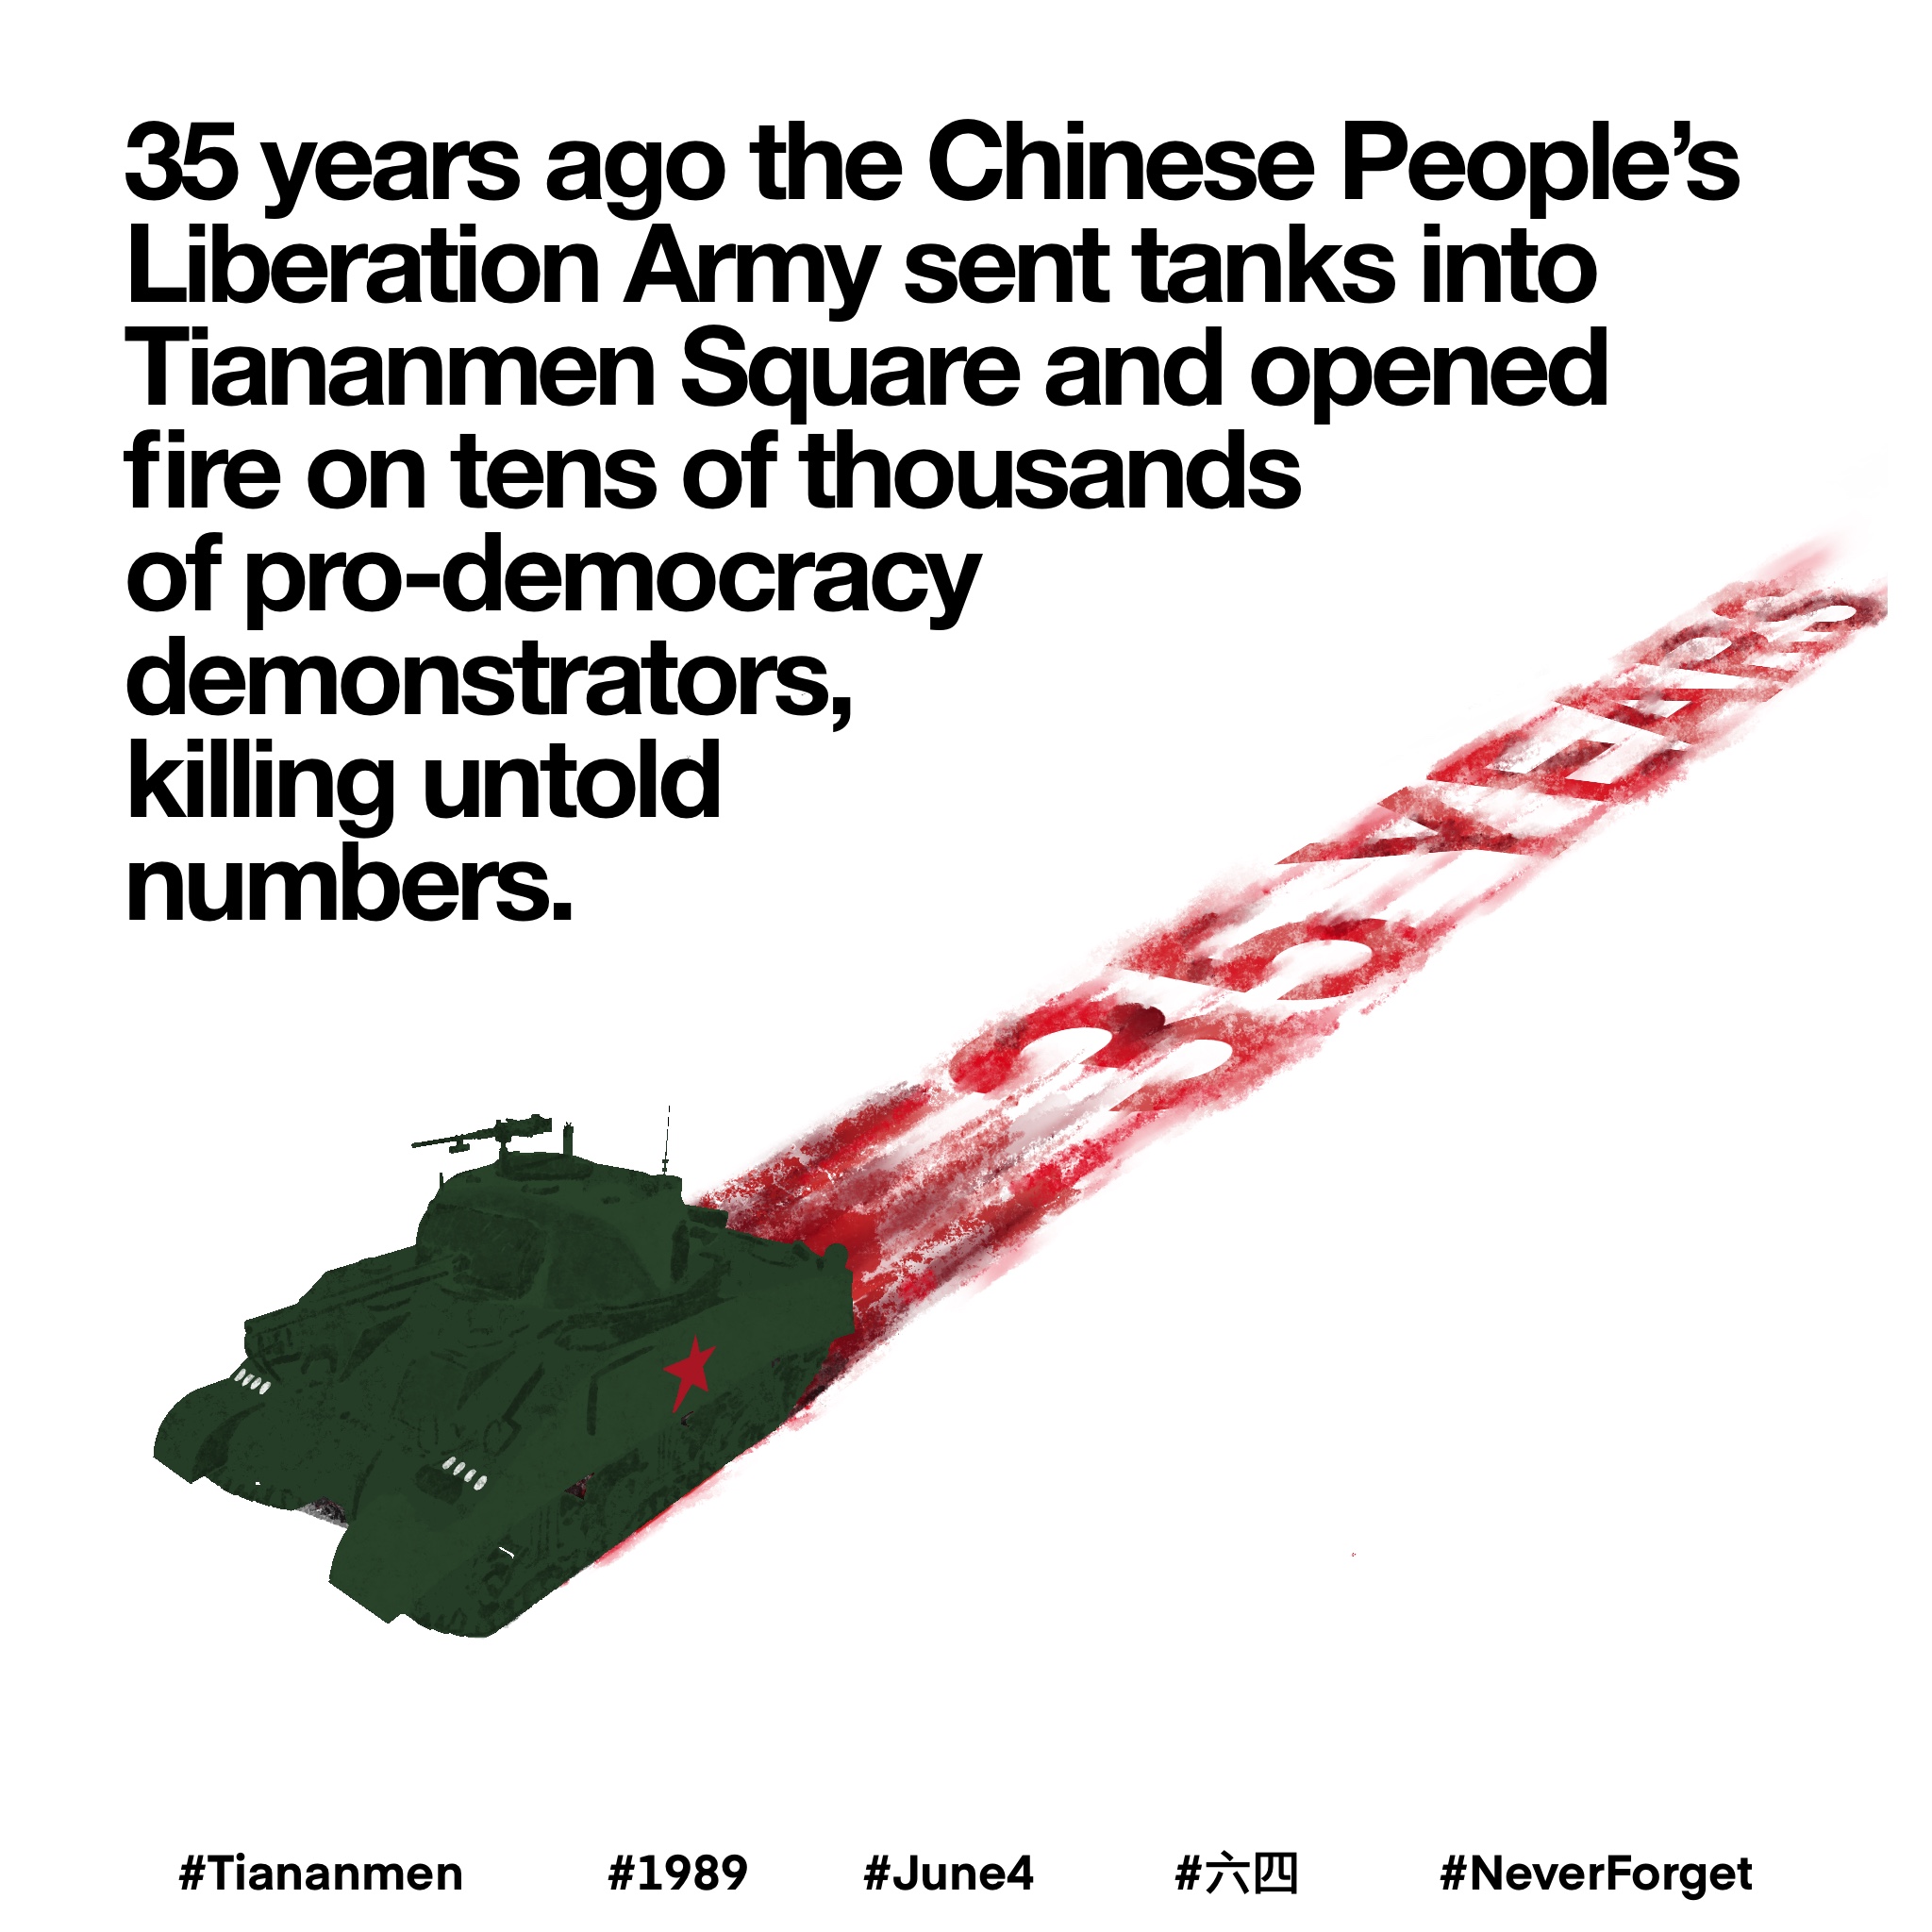 35 years ago the Chinese People's Liberation Army sent tanks into Tiananmen Square and opened fire on tens of thousands of pro-democracy demonstrators, killing untold numbers